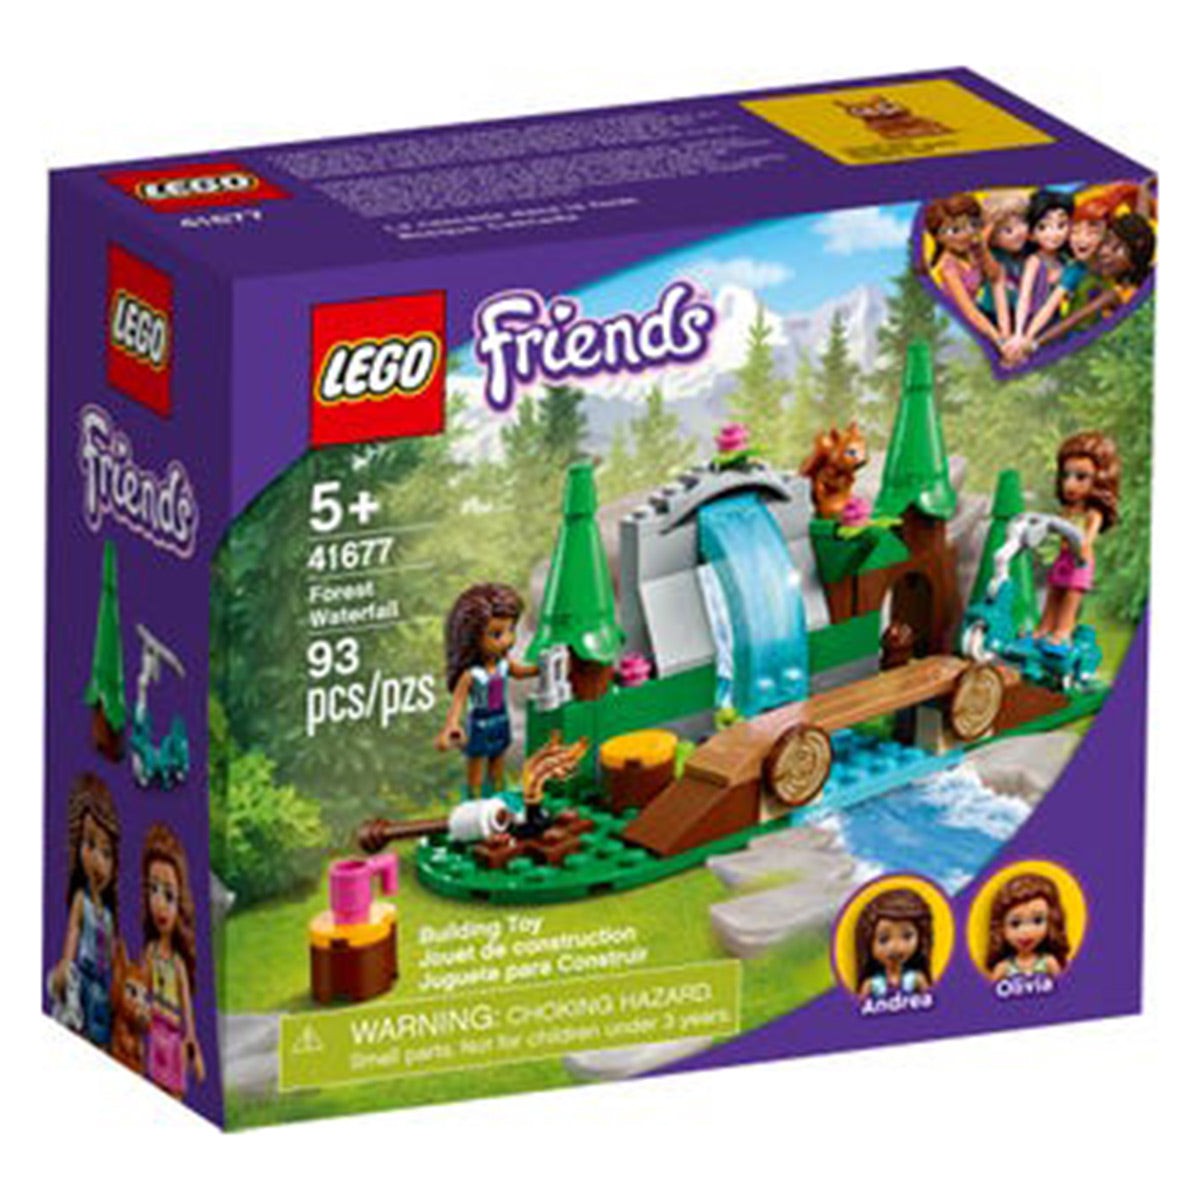 LEGO JOUET K.I.D. INC Toys & Games LEGO Friends Forest Waterfall, 41677, Ages 5+, 93 Pieces 673419342155